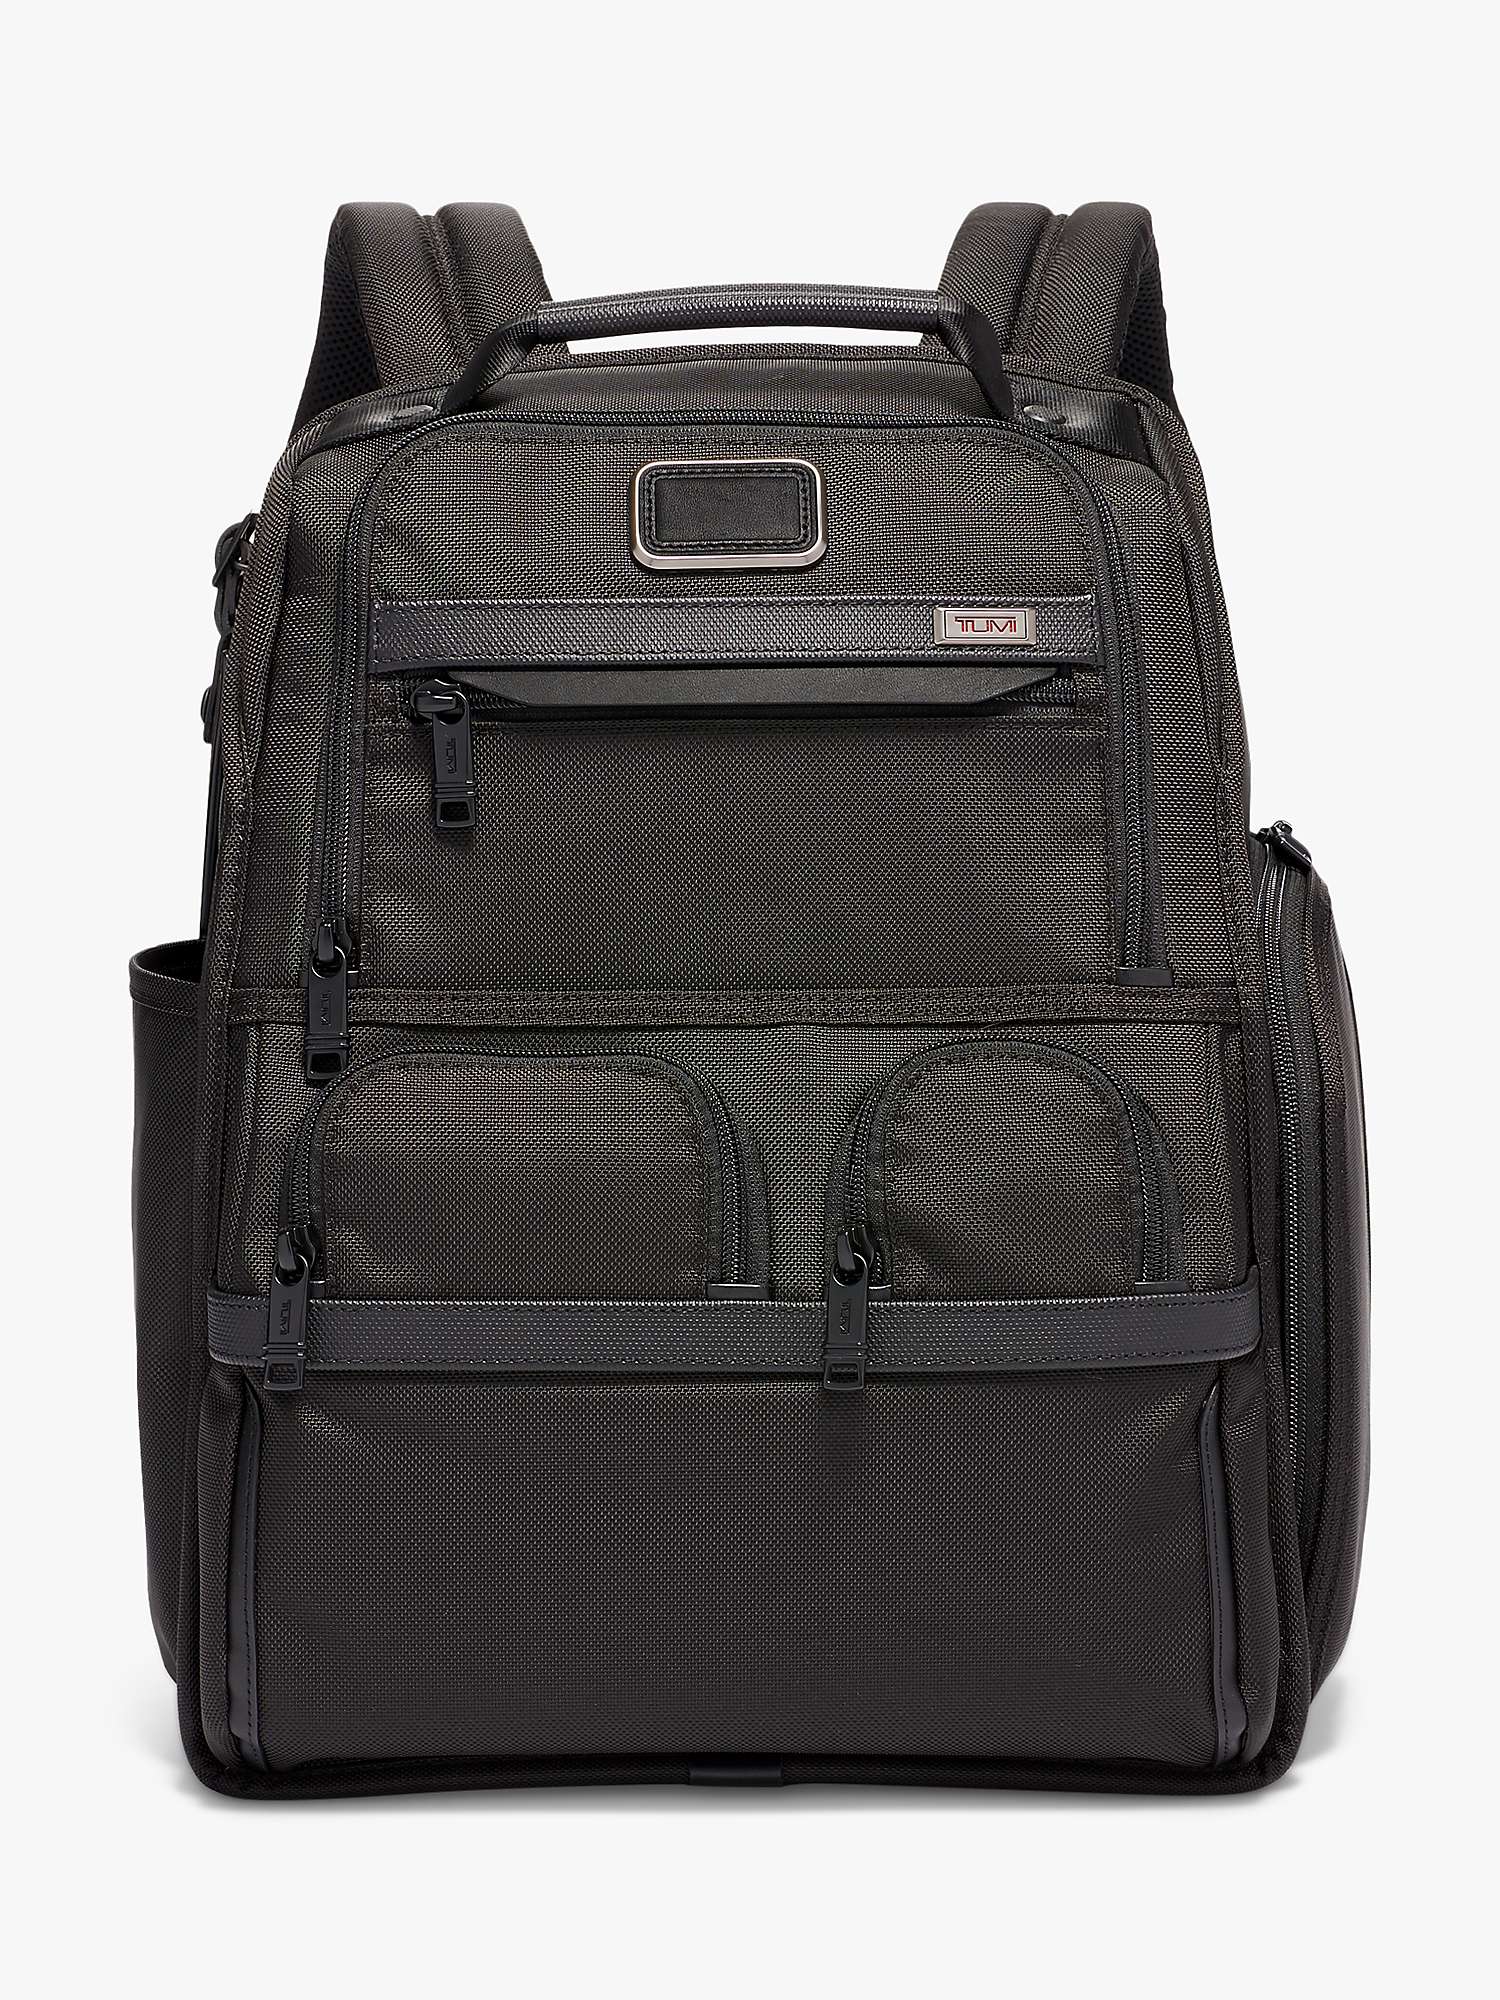 Buy TUMI Alpha 3 Compact Laptop Brief Pack Backpack, Black Online at johnlewis.com